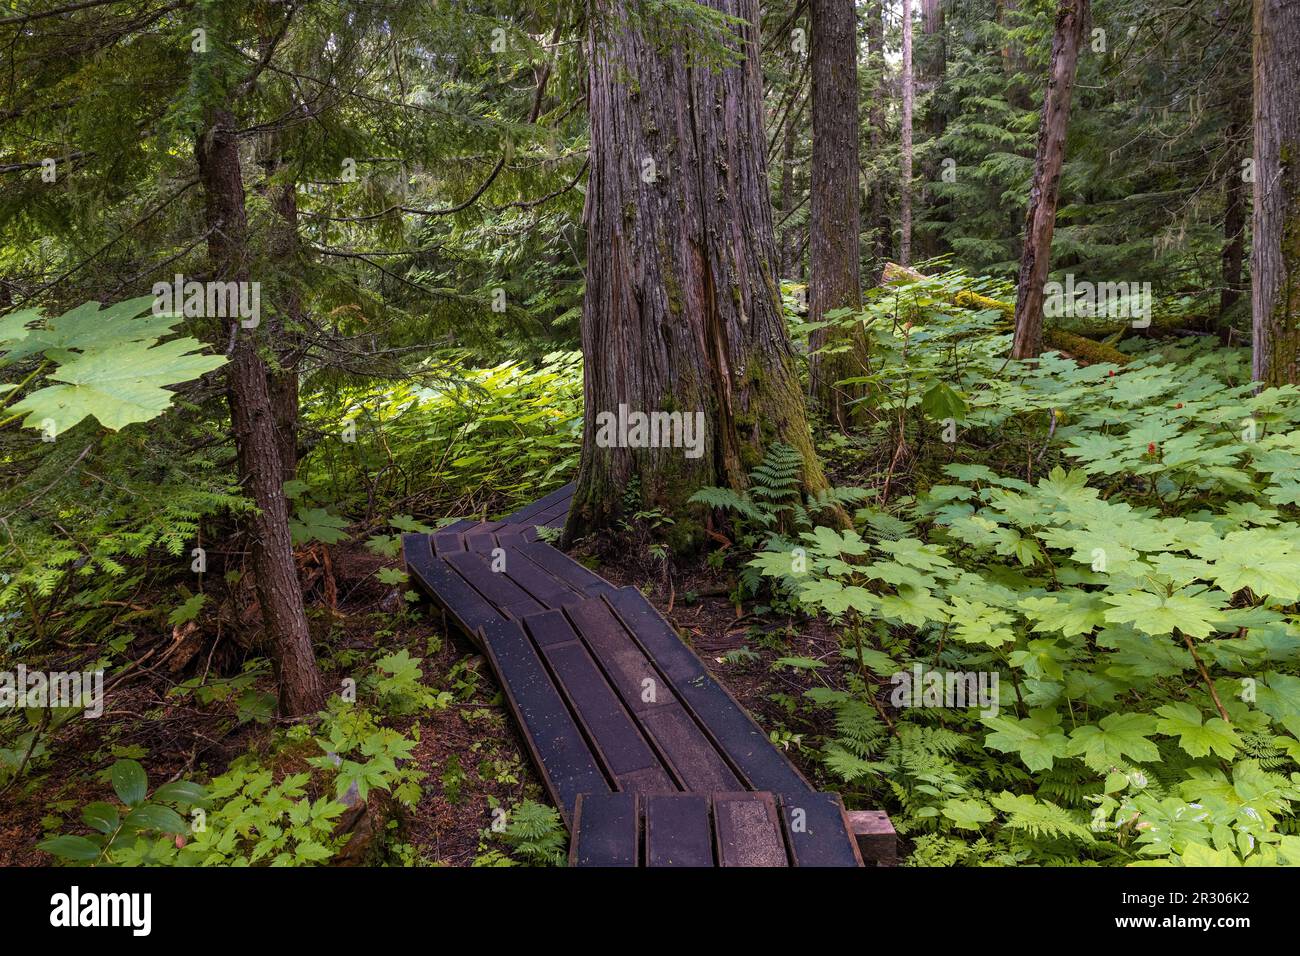 Western red cedar tree (Thuja plicatain) forest and walking path in Chun T’oh Whudujut Ancient Forest provincial park, British Columbia, Canada. Stock Photo